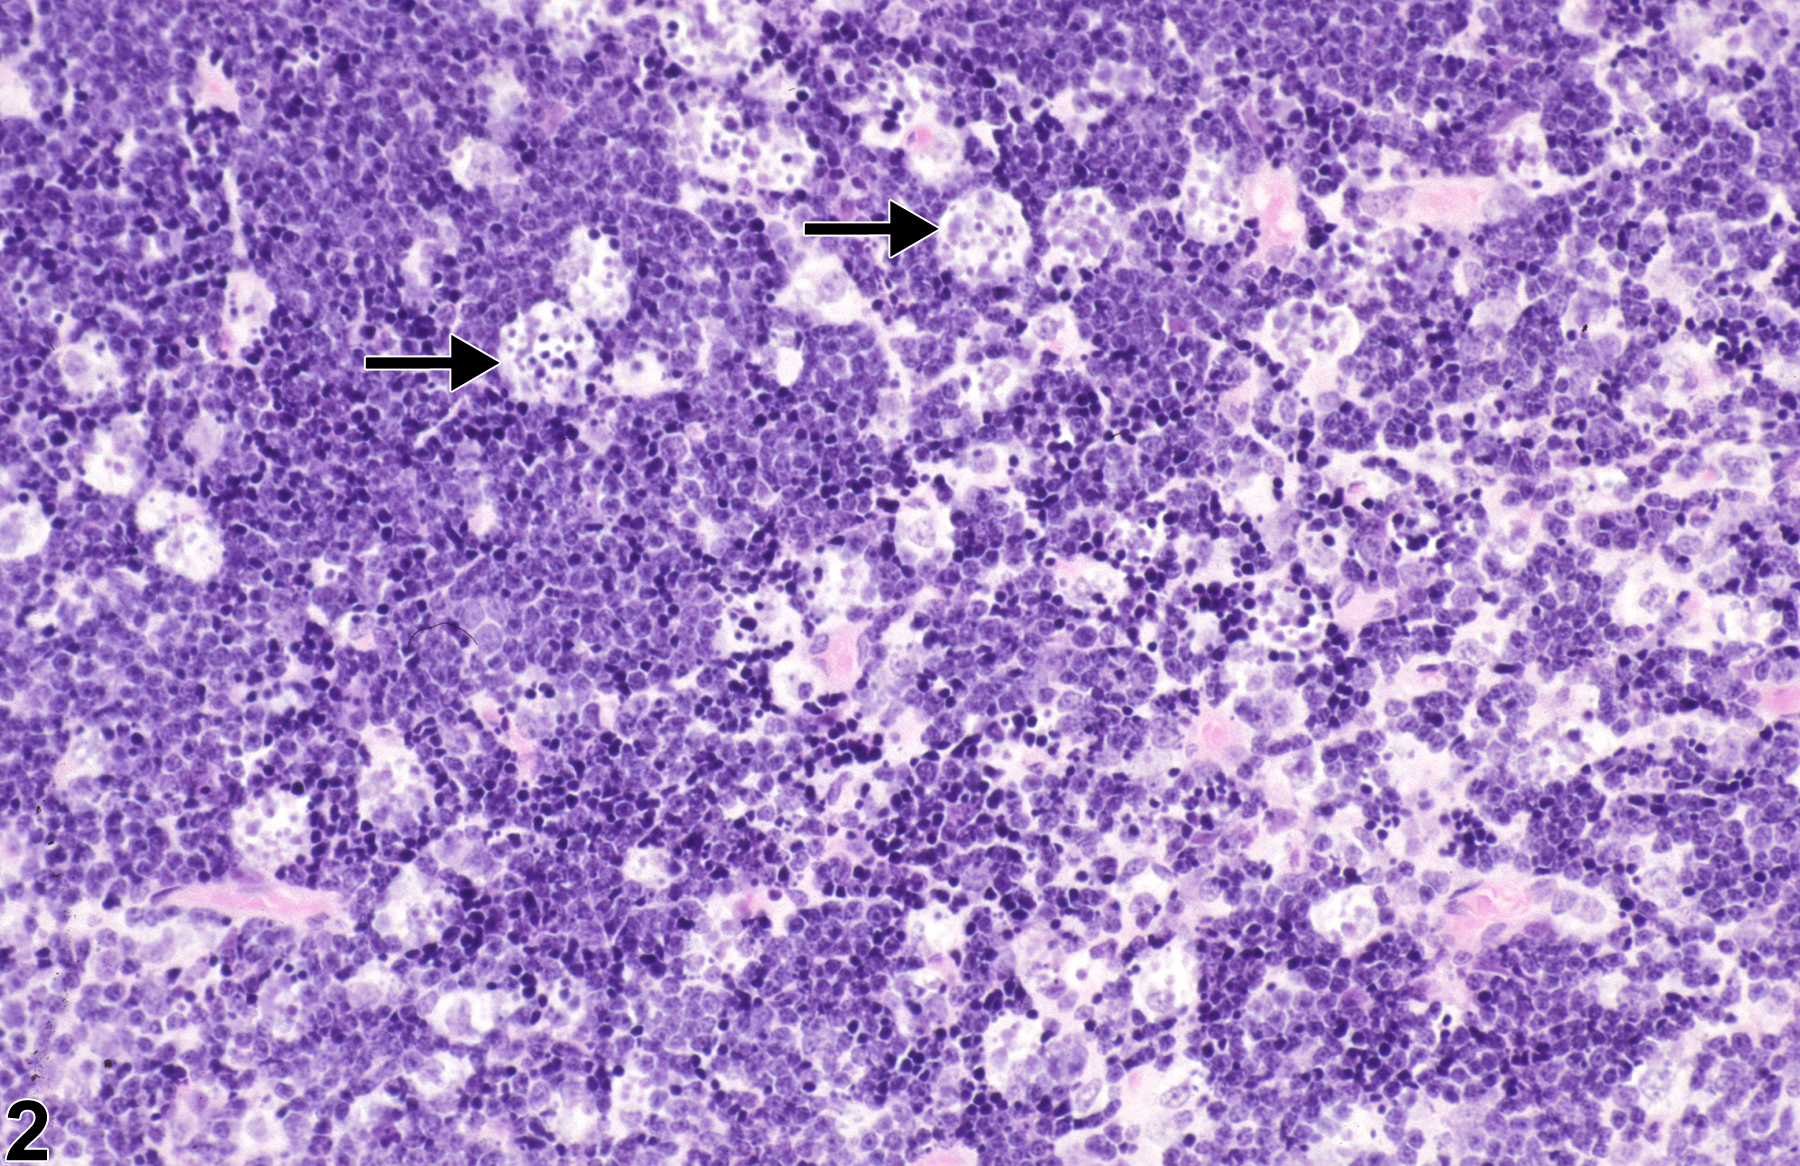 Image of apoptosis, lymphocyte in the thymus from a female B6C3F1/N mouse in a subchronic study